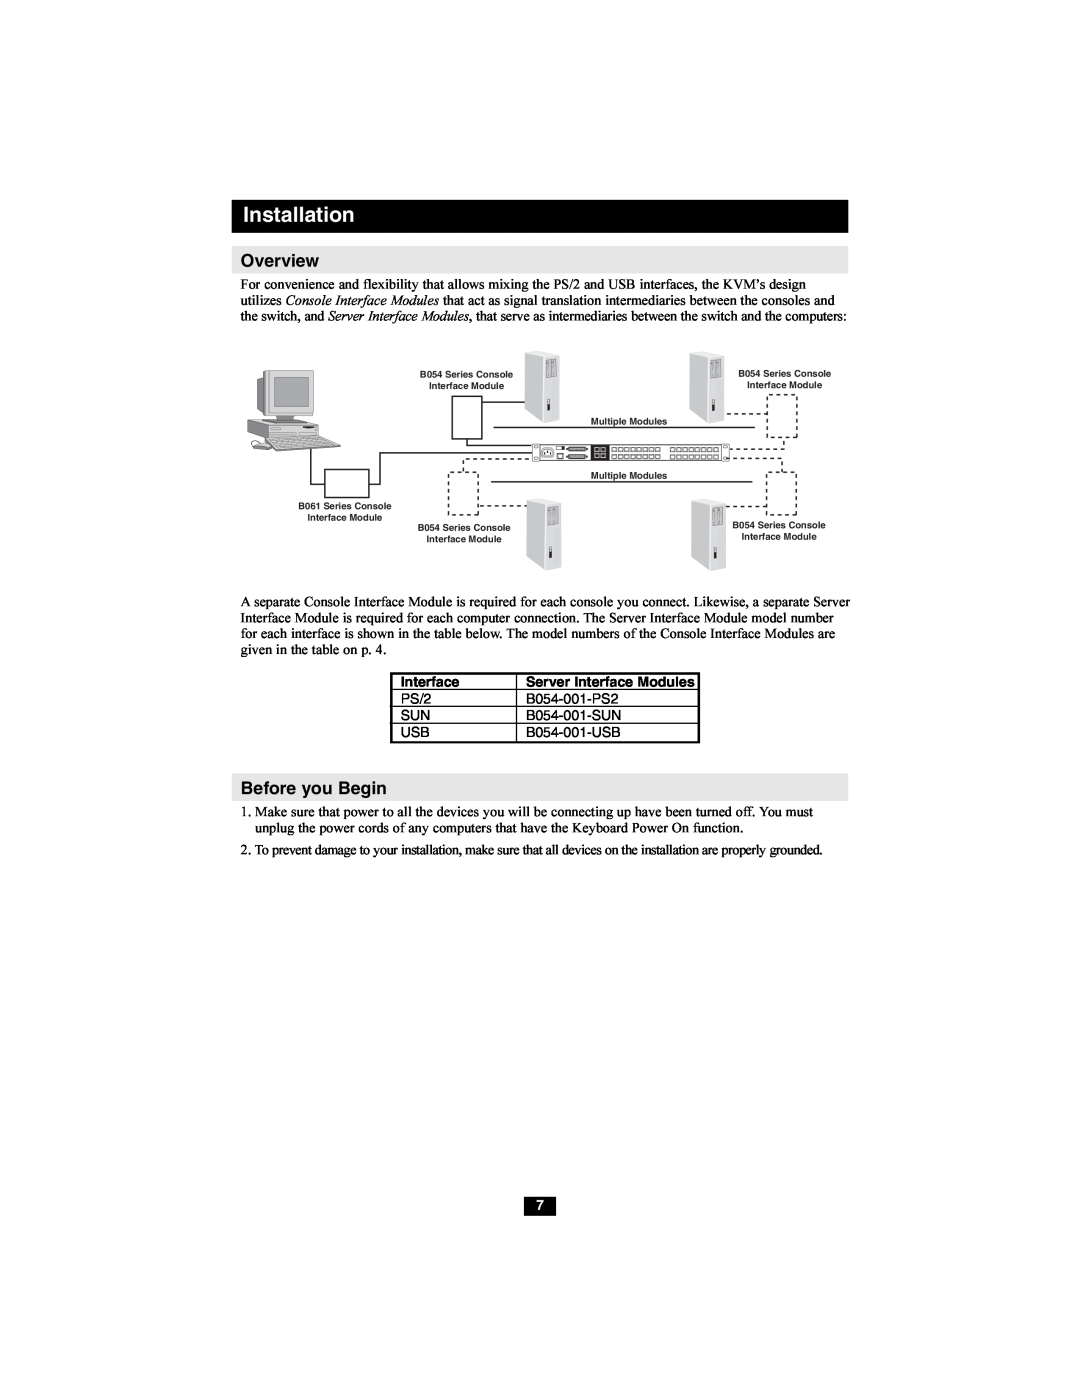 Tripp Lite B060-016-2 owner manual Installation, Overview, Before you Begin, Interface 